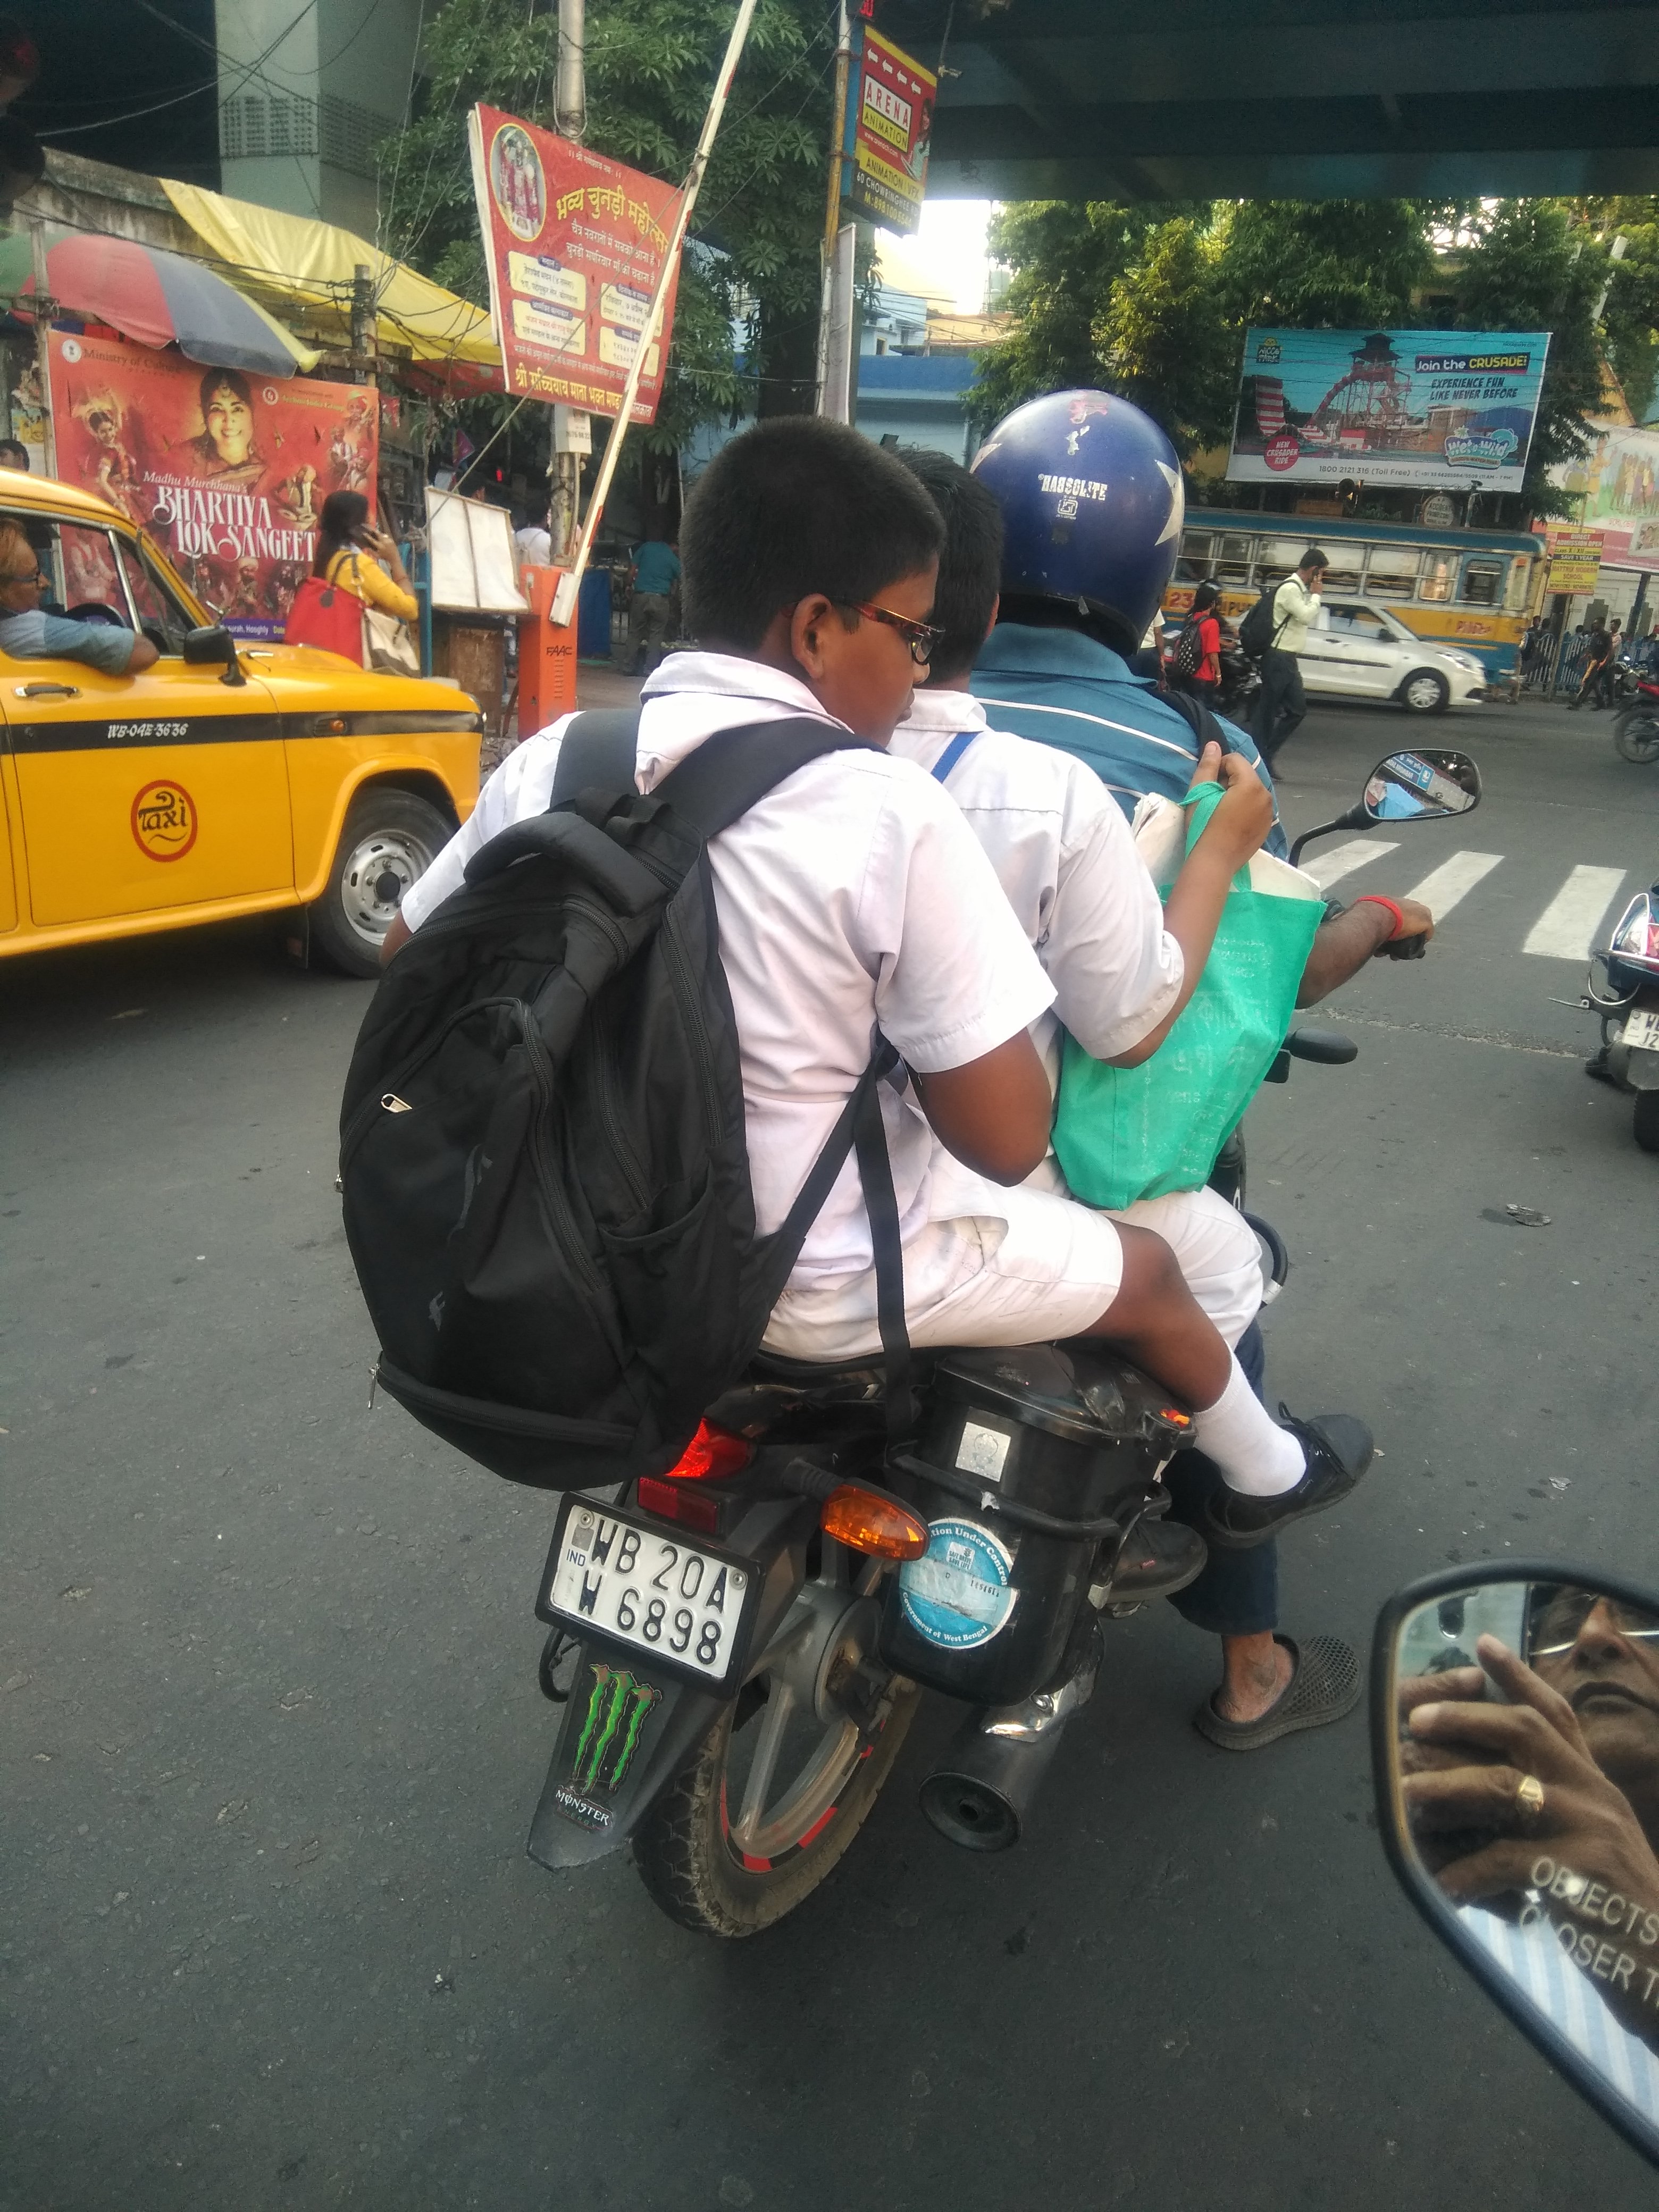 Riding Without Helmets Is Risky And Punishable